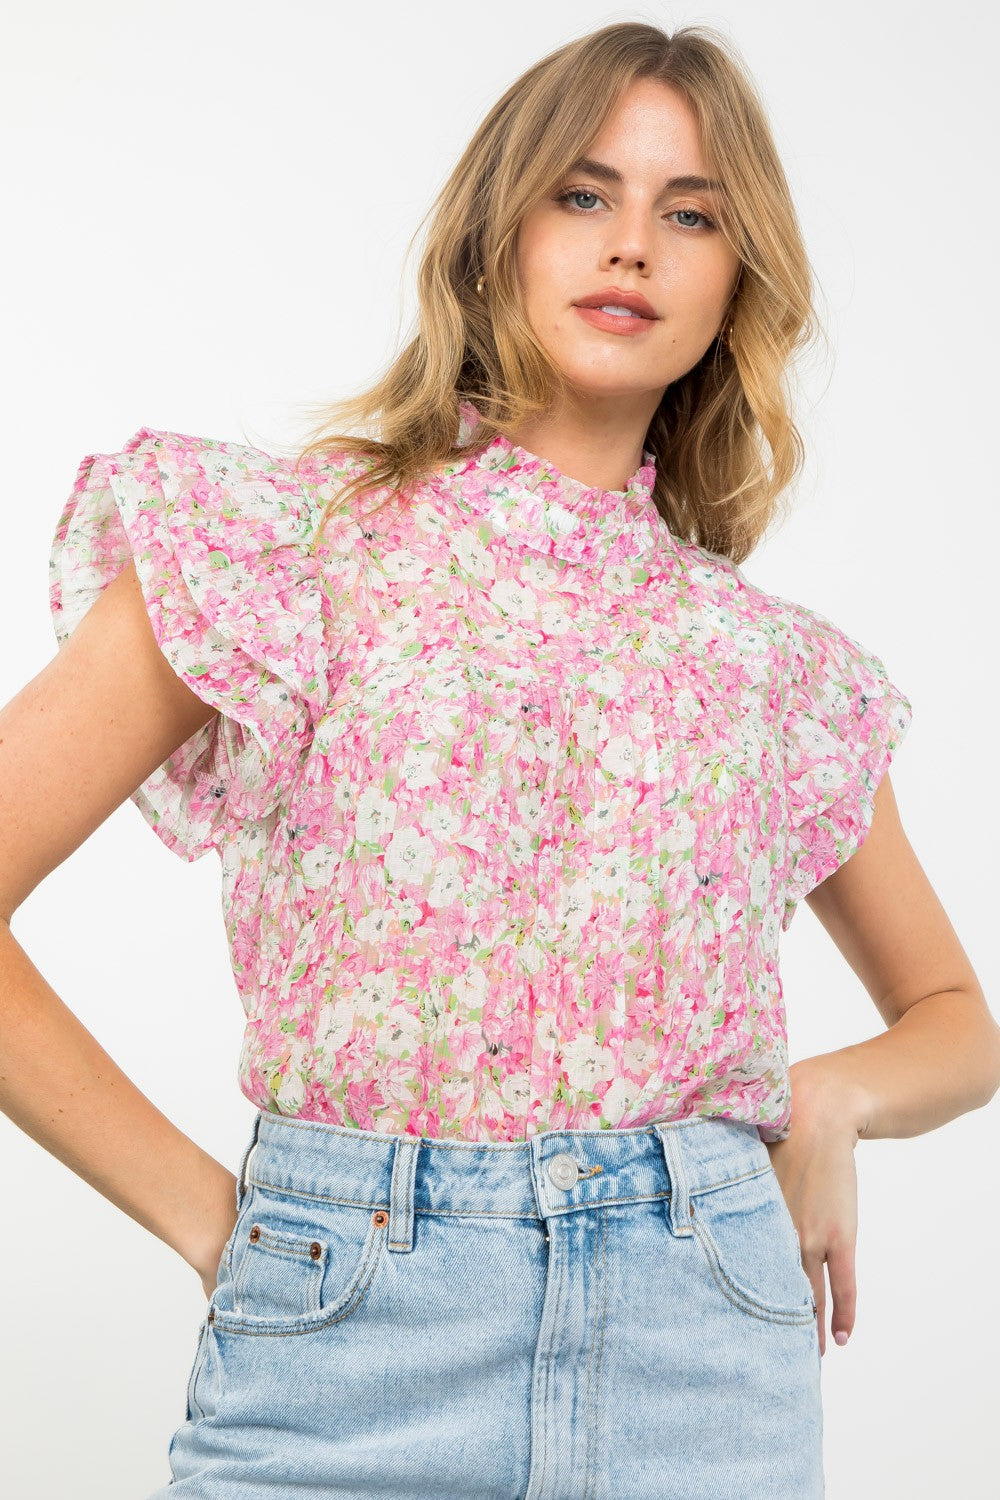 Floral Frenzy Blouse